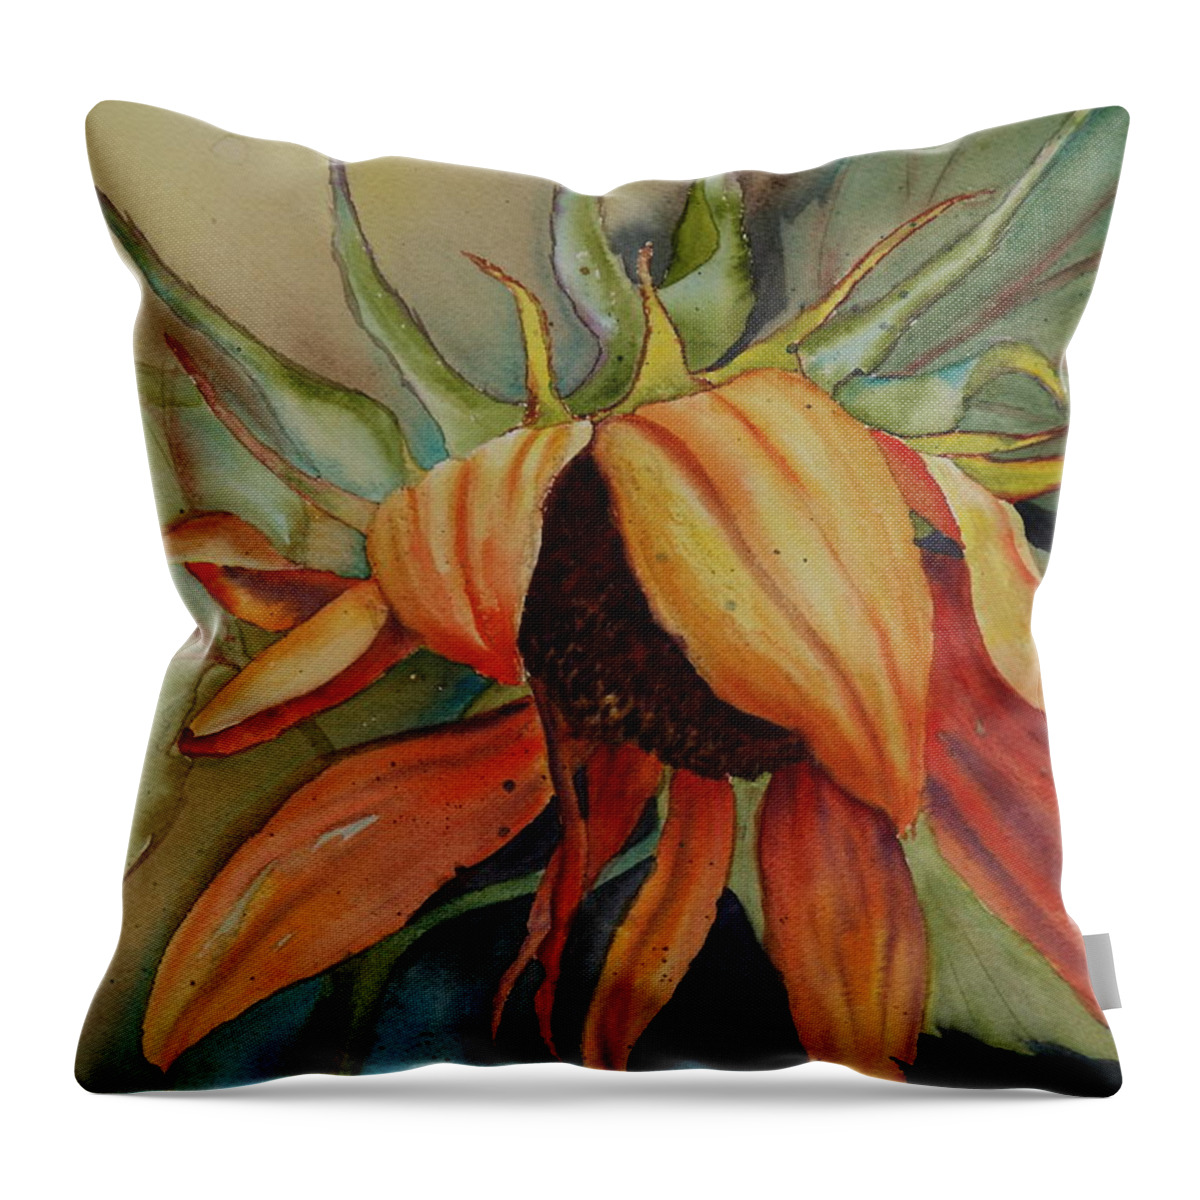 Sunflower Throw Pillow featuring the painting Sunflower by Ruth Kamenev